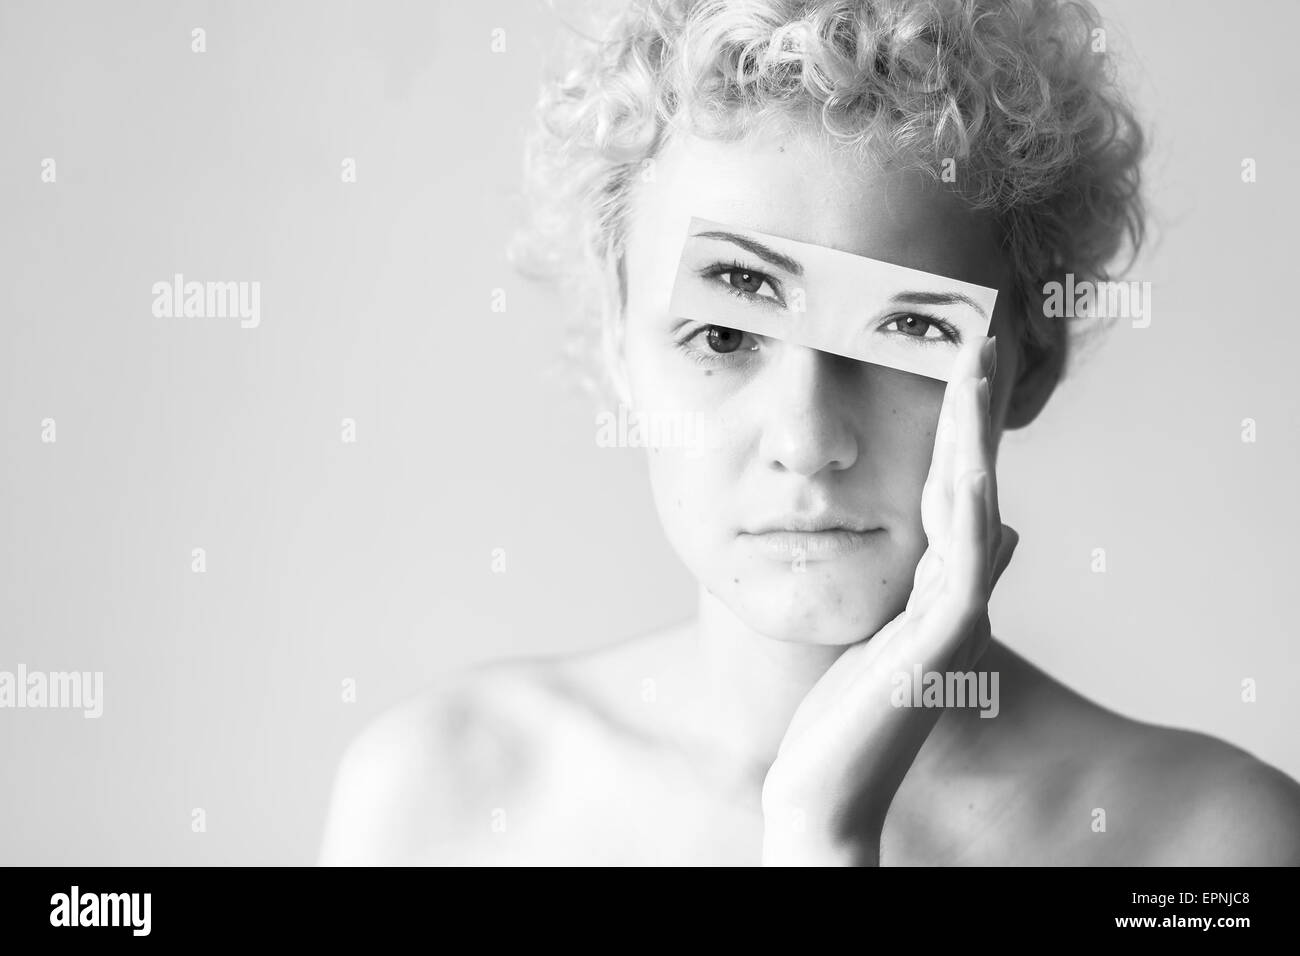 Young curly-haired tender girl closes her eyes to picture painted eyes. Black and white photography in bright colors. Stock Photo